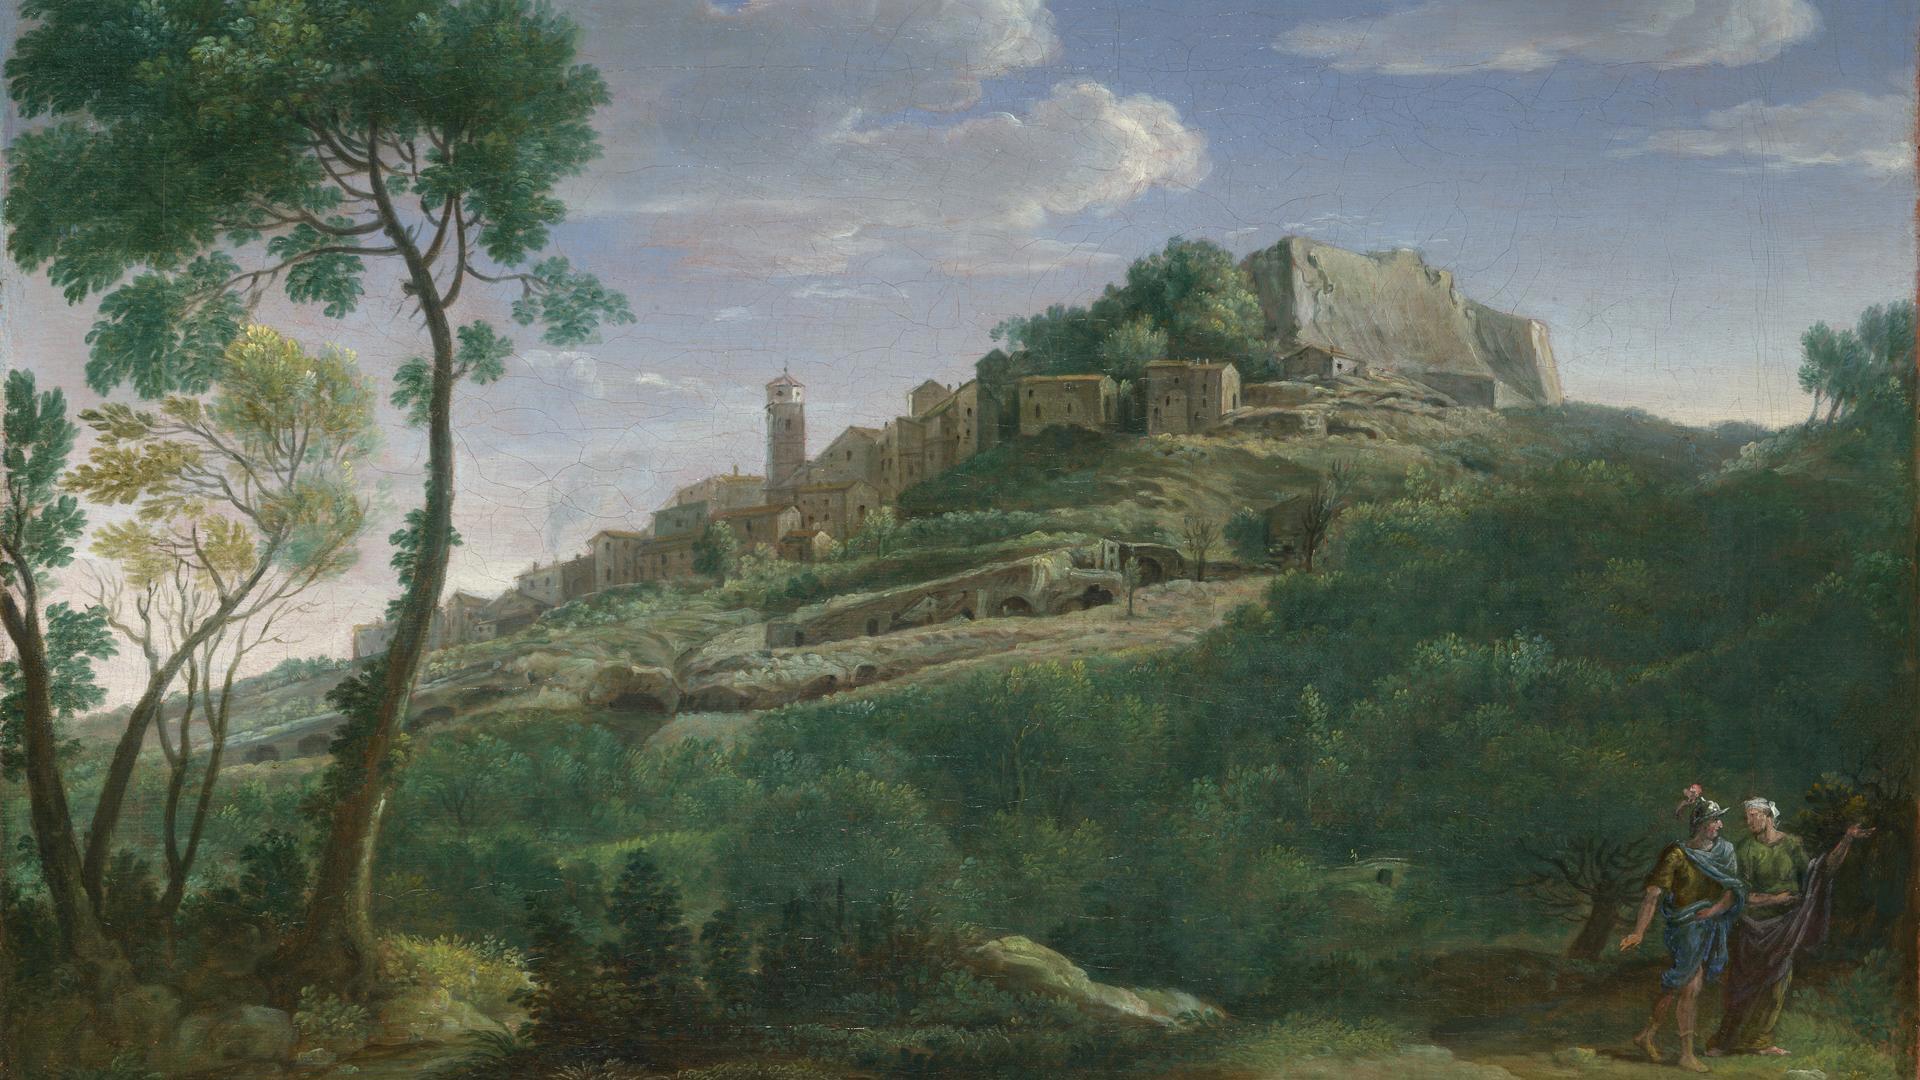 A Landscape with an Italian Hill Town by Hendrik Frans van Lint